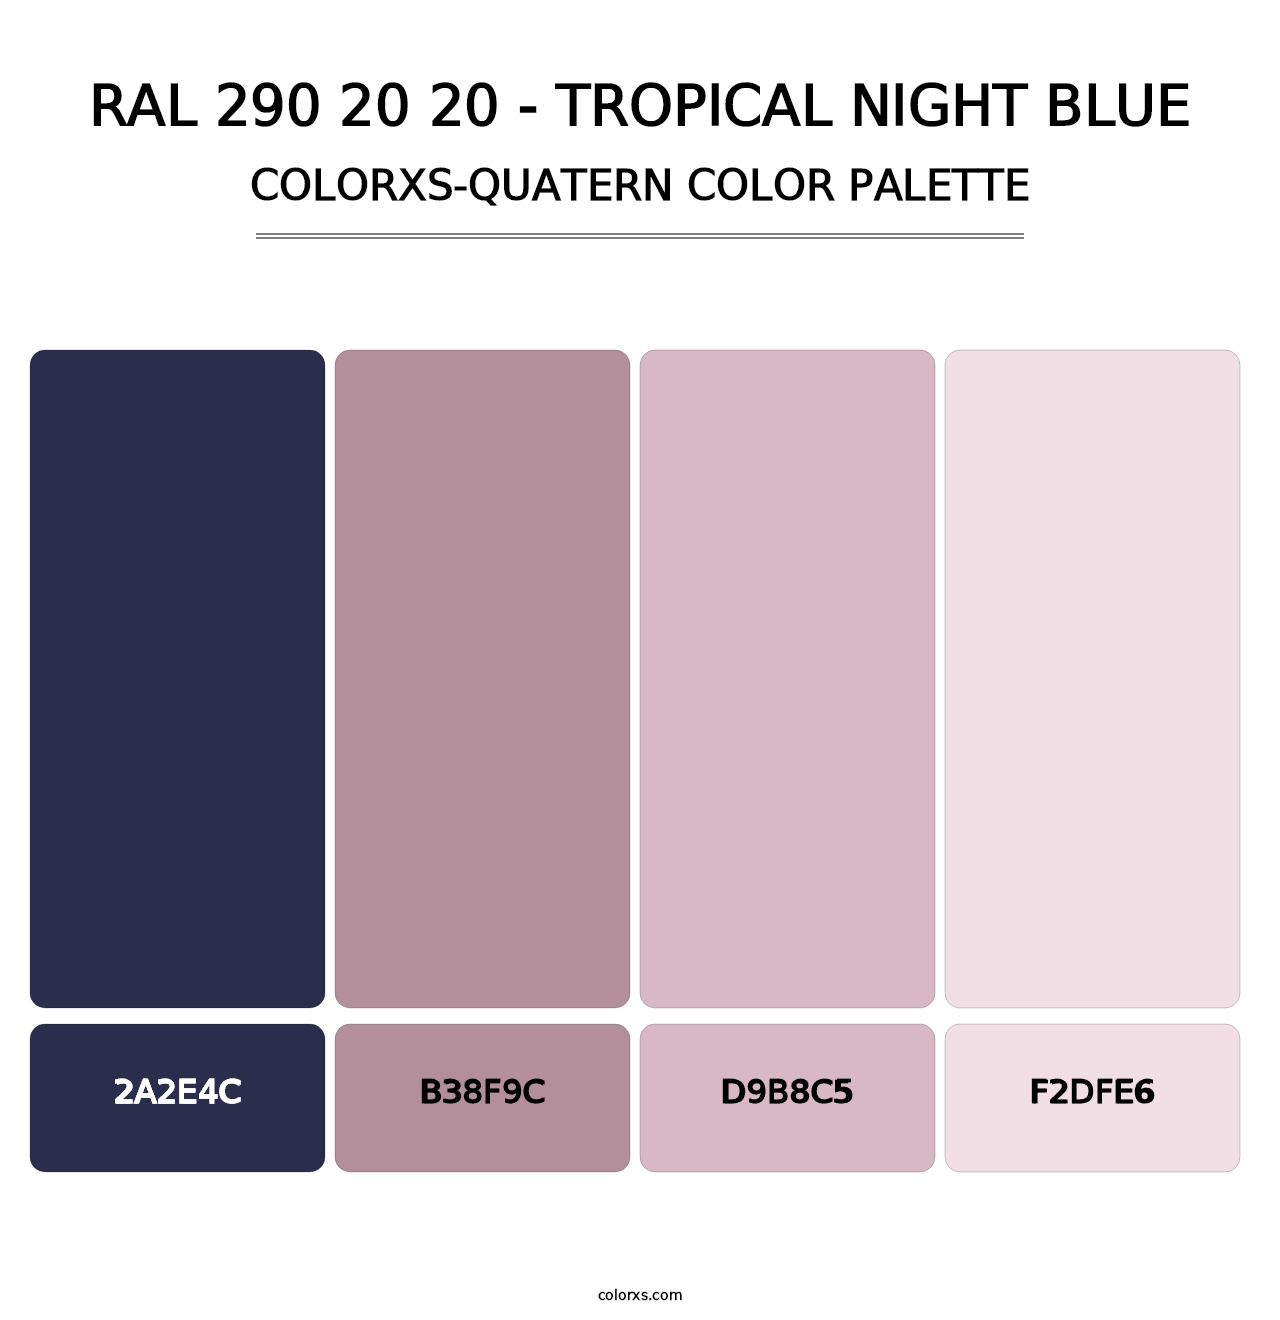 RAL 290 20 20 - Tropical Night Blue - Colorxs Quatern Palette